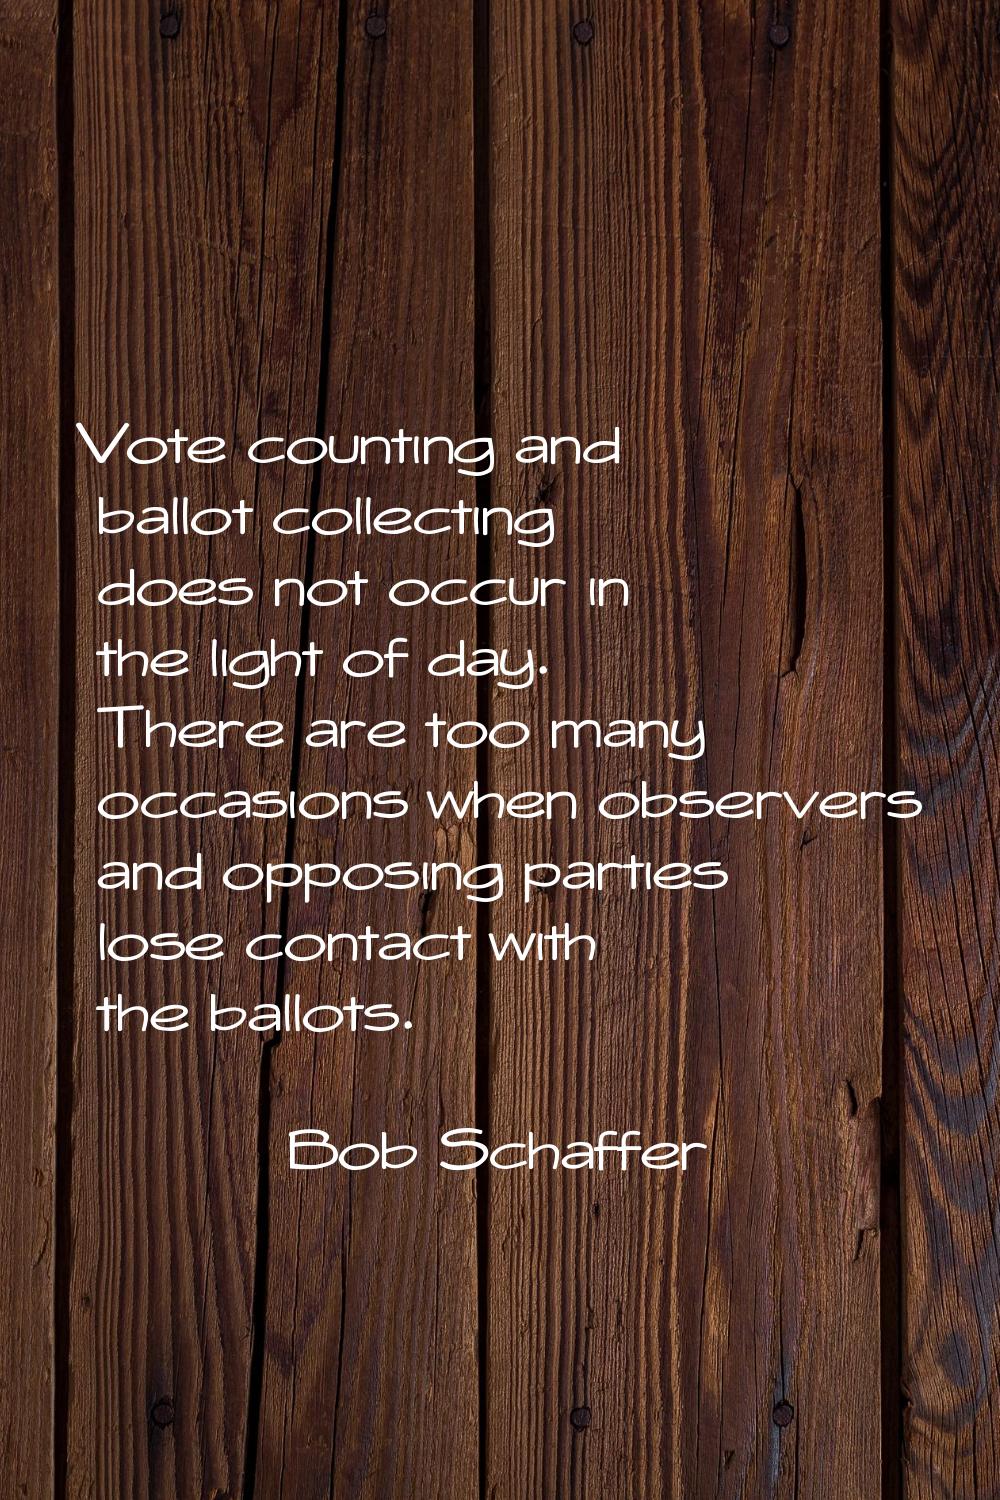 Vote counting and ballot collecting does not occur in the light of day. There are too many occasion